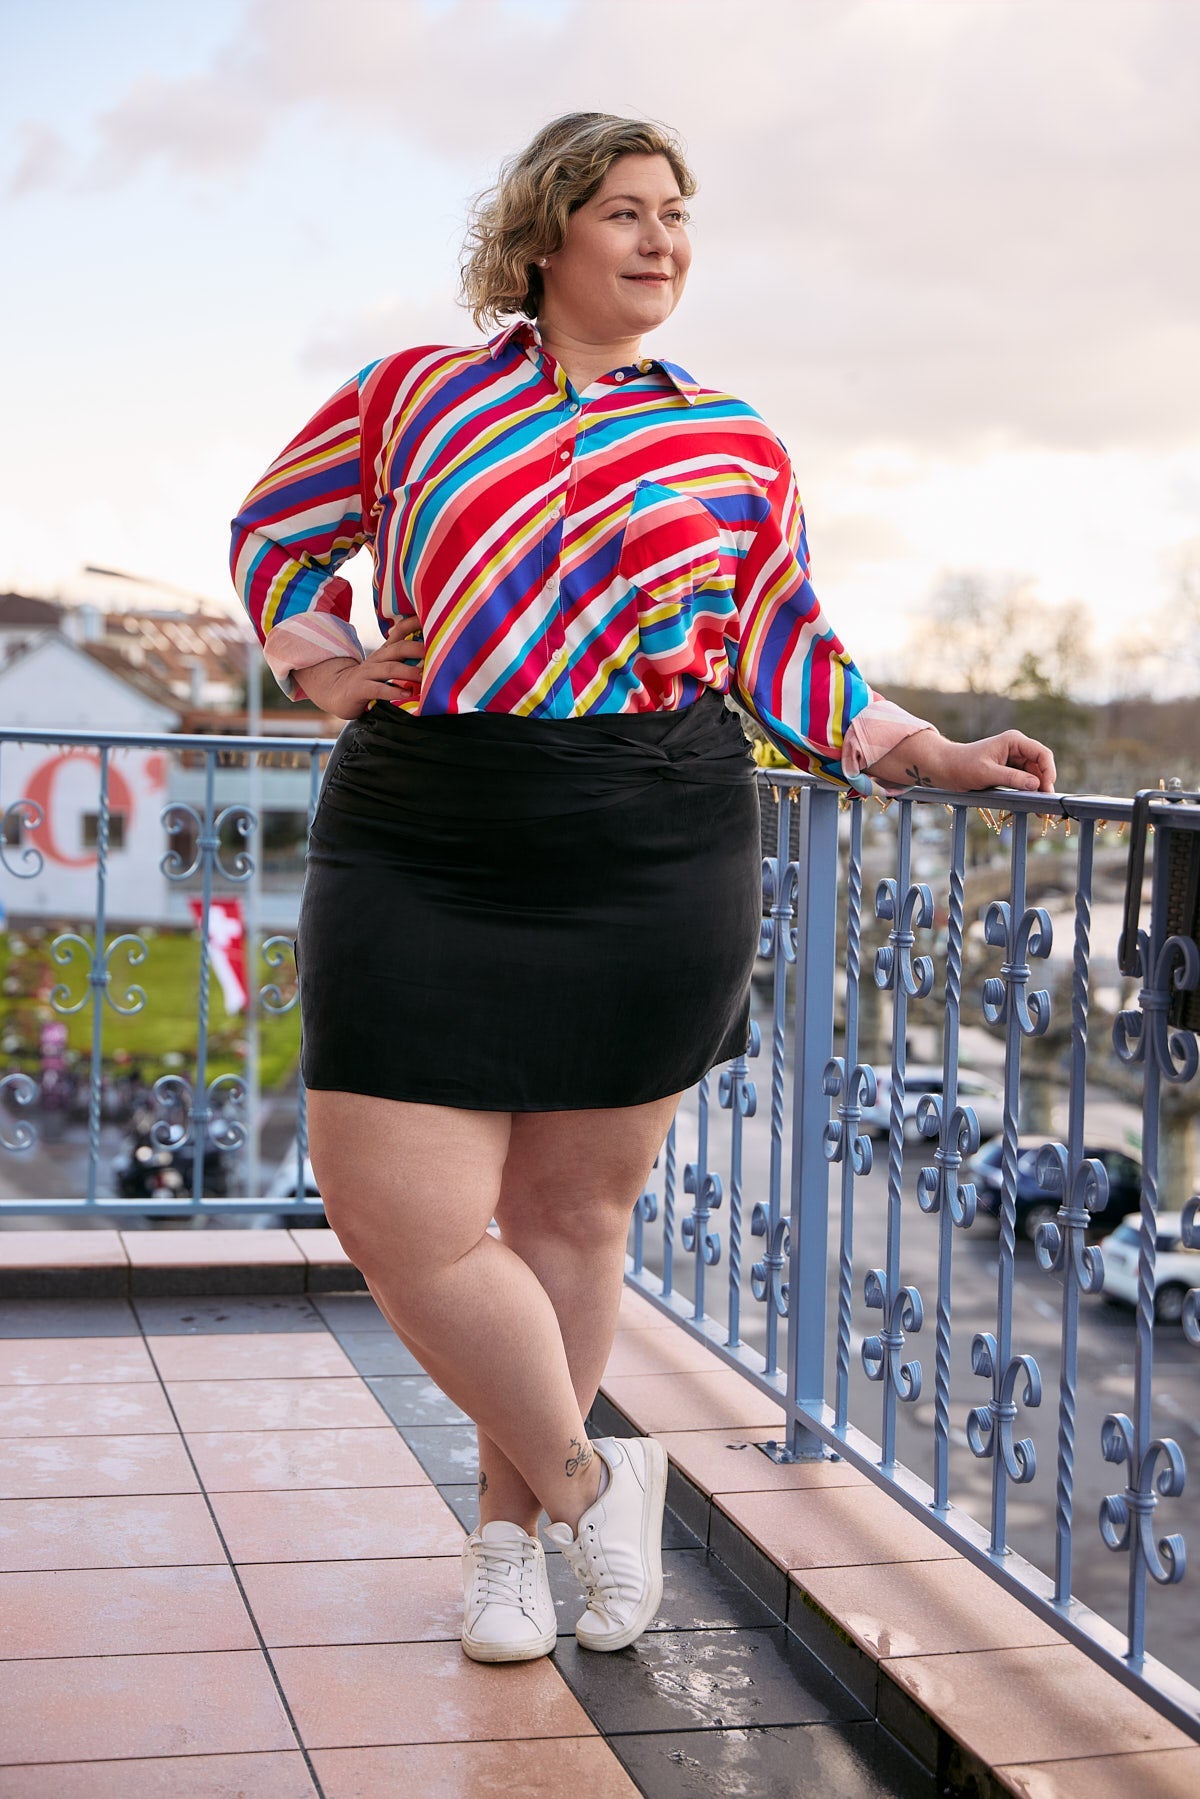 A plus-size woman stands confidently wearing a sleek black cupro mini skirt.